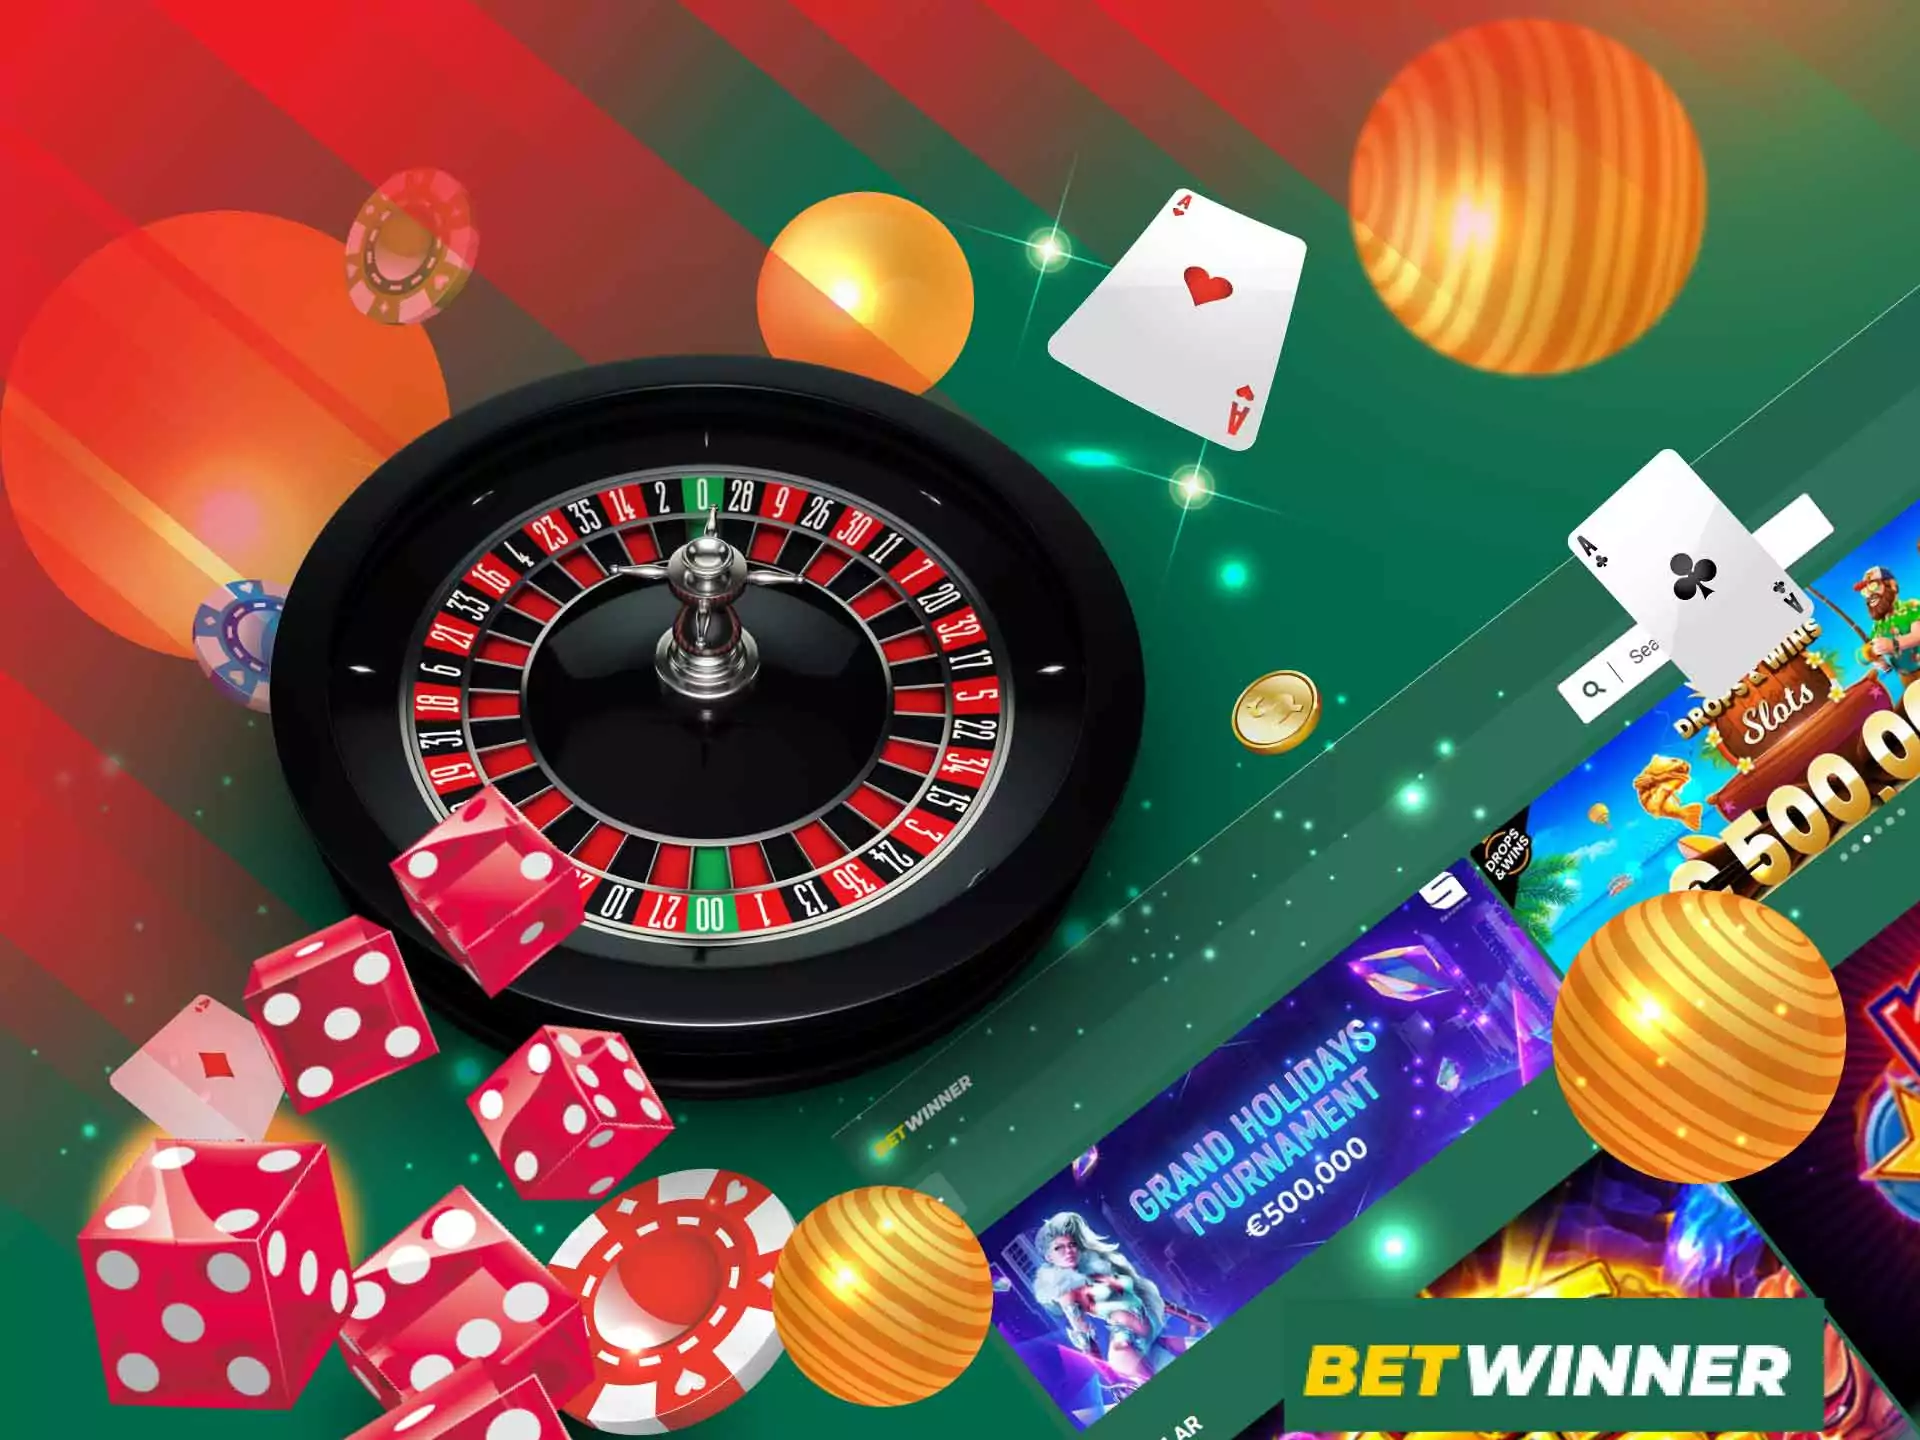 Play the oldest traditional Sic Bo game at Betwinner.